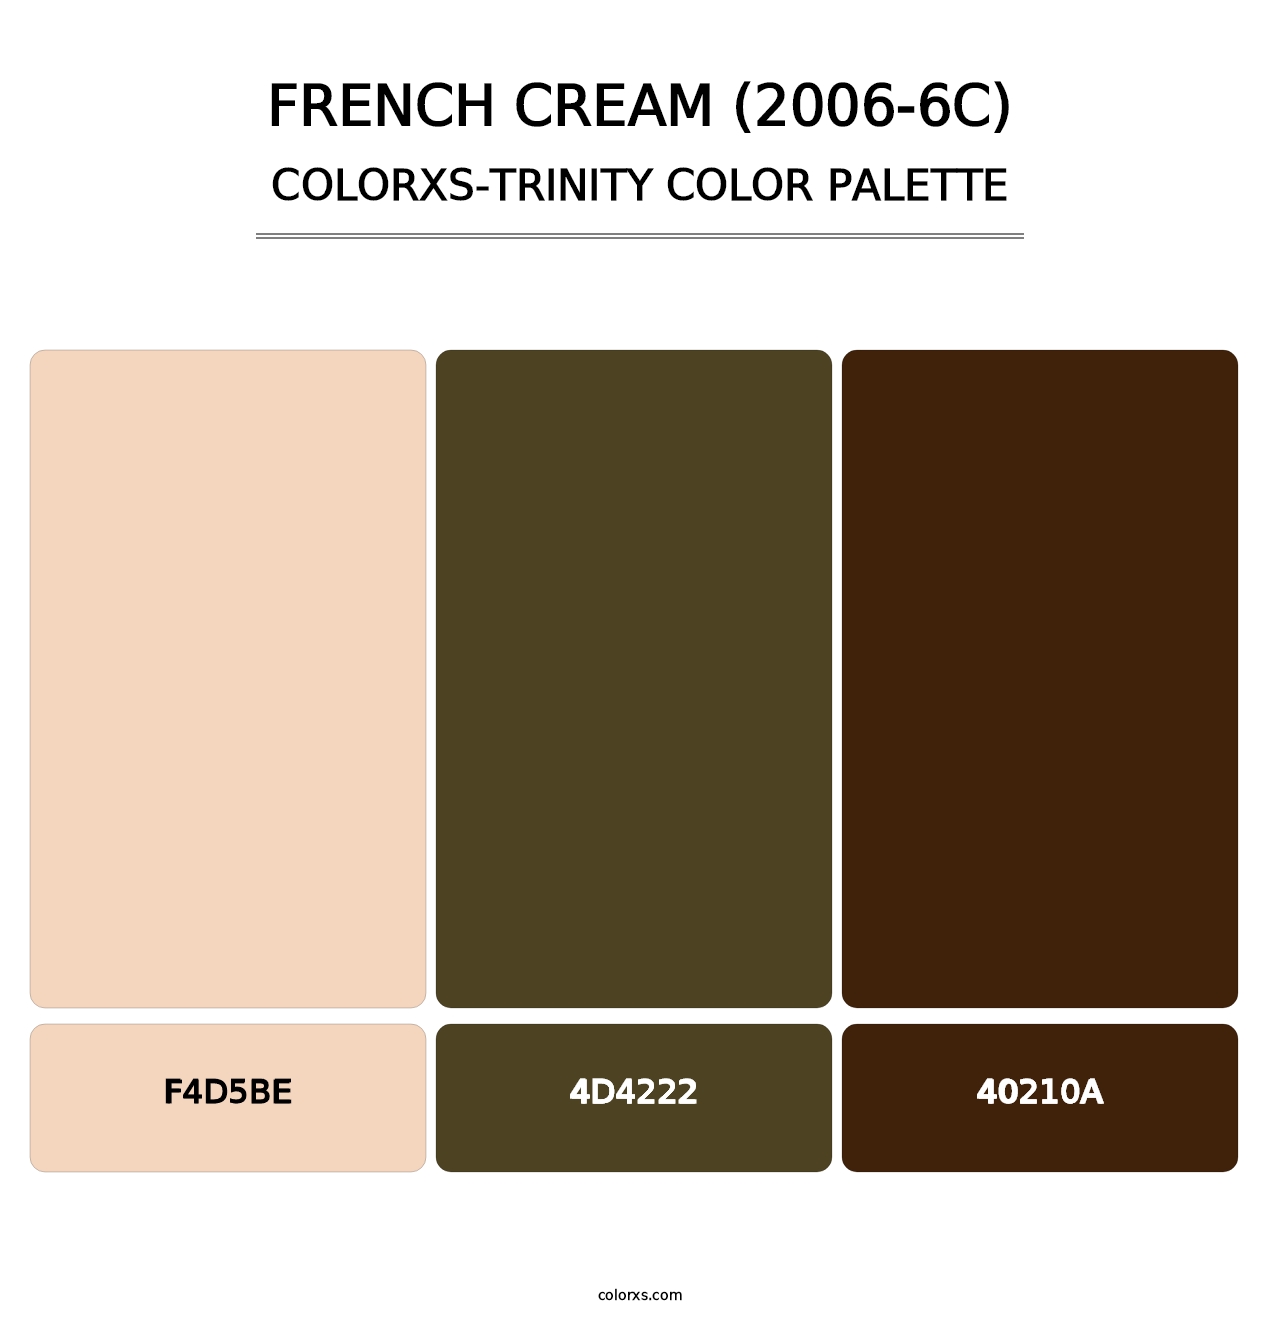 French Cream (2006-6C) - Colorxs Trinity Palette